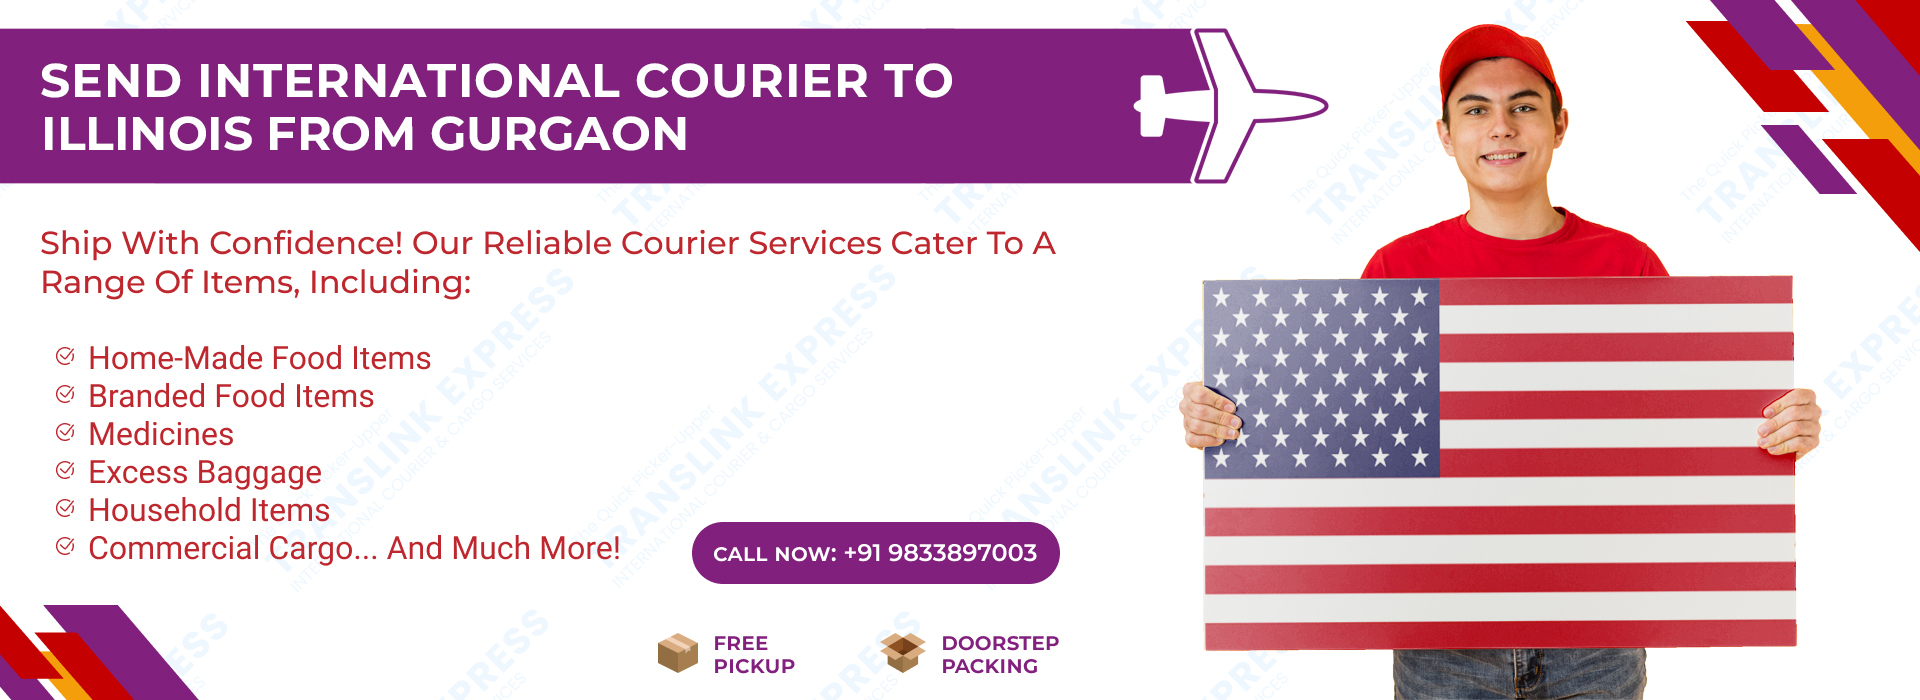 Courier to Illinois From Gurgaon